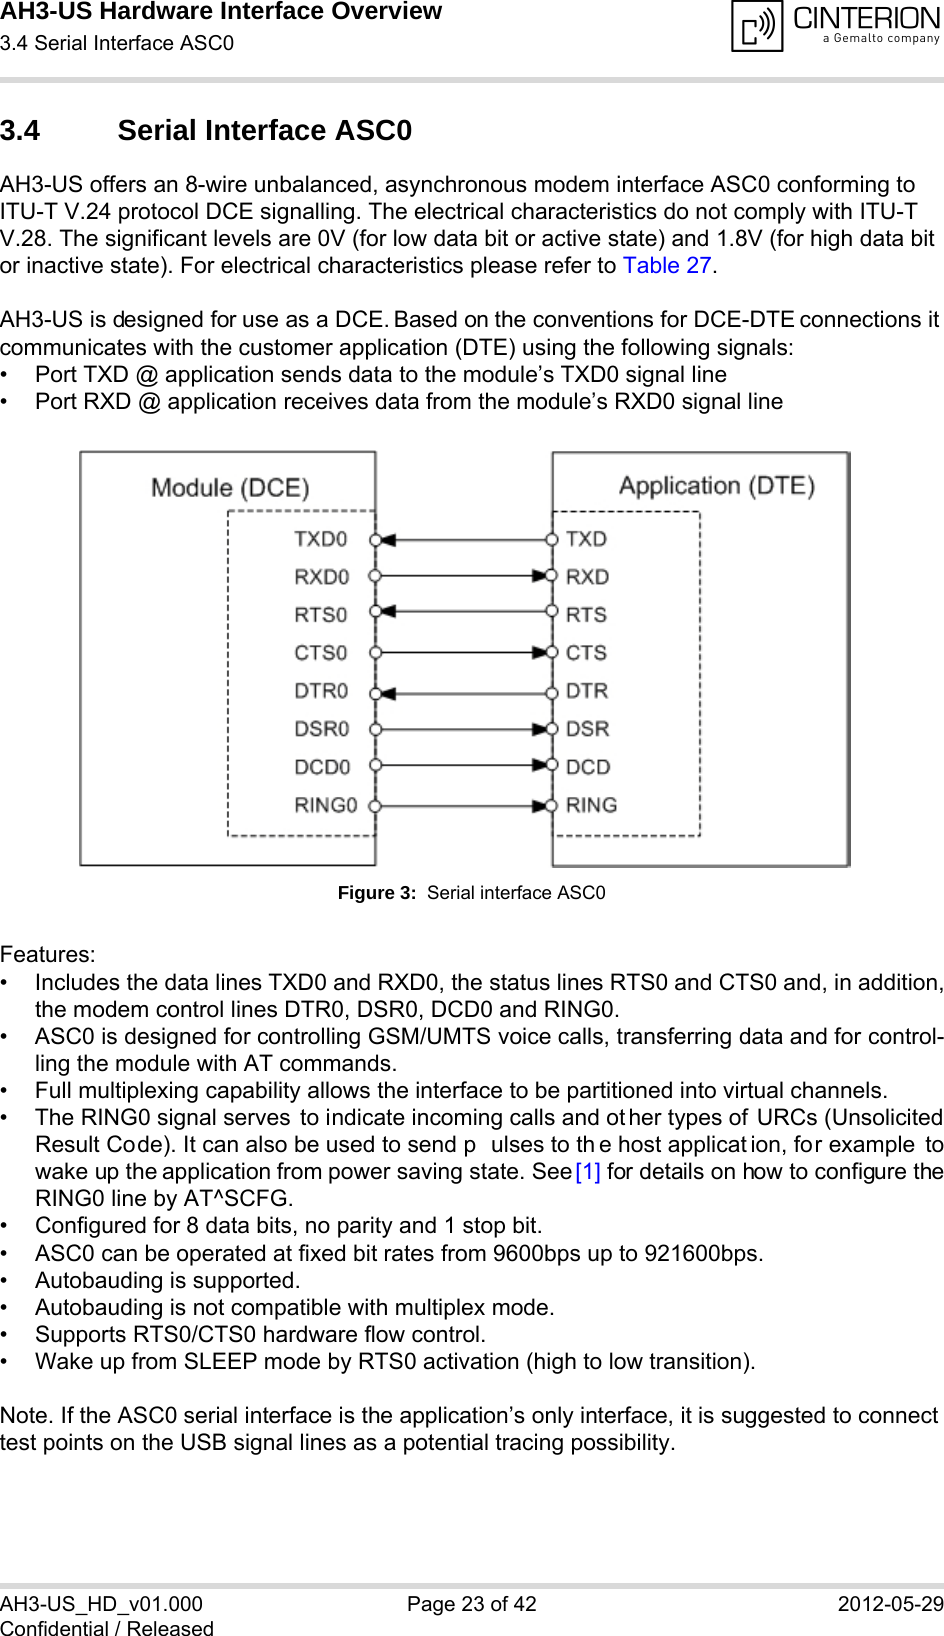 AH3-US Hardware Interface Overview3.4 Serial Interface ASC028AH3-US_HD_v01.000 Page 23 of 42 2012-05-29Confidential / Released3.4 Serial Interface ASC0AH3-US offers an 8-wire unbalanced, asynchronous modem interface ASC0 conforming to ITU-T V.24 protocol DCE signalling. The electrical characteristics do not comply with ITU-T V.28. The significant levels are 0V (for low data bit or active state) and 1.8V (for high data bit or inactive state). For electrical characteristics please refer to Table 27.AH3-US is designed for use as a DCE. Based on the conventions for DCE-DTE connections it communicates with the customer application (DTE) using the following signals:• Port TXD @ application sends data to the module’s TXD0 signal line• Port RXD @ application receives data from the module’s RXD0 signal lineFigure 3:  Serial interface ASC0Features:• Includes the data lines TXD0 and RXD0, the status lines RTS0 and CTS0 and, in addition,the modem control lines DTR0, DSR0, DCD0 and RING0.• ASC0 is designed for controlling GSM/UMTS voice calls, transferring data and for control-ling the module with AT commands.• Full multiplexing capability allows the interface to be partitioned into virtual channels.• The RING0 signal serves  to indicate incoming calls and ot her types of URCs (UnsolicitedResult Code). It can also be used to send p ulses to th e host applicat ion, for example towake up the application from power saving state. See [1] for details on how to configure theRING0 line by AT^SCFG.• Configured for 8 data bits, no parity and 1 stop bit. • ASC0 can be operated at fixed bit rates from 9600bps up to 921600bps.• Autobauding is supported.• Autobauding is not compatible with multiplex mode.• Supports RTS0/CTS0 hardware flow control.• Wake up from SLEEP mode by RTS0 activation (high to low transition).Note. If the ASC0 serial interface is the application’s only interface, it is suggested to connect test points on the USB signal lines as a potential tracing possibility.